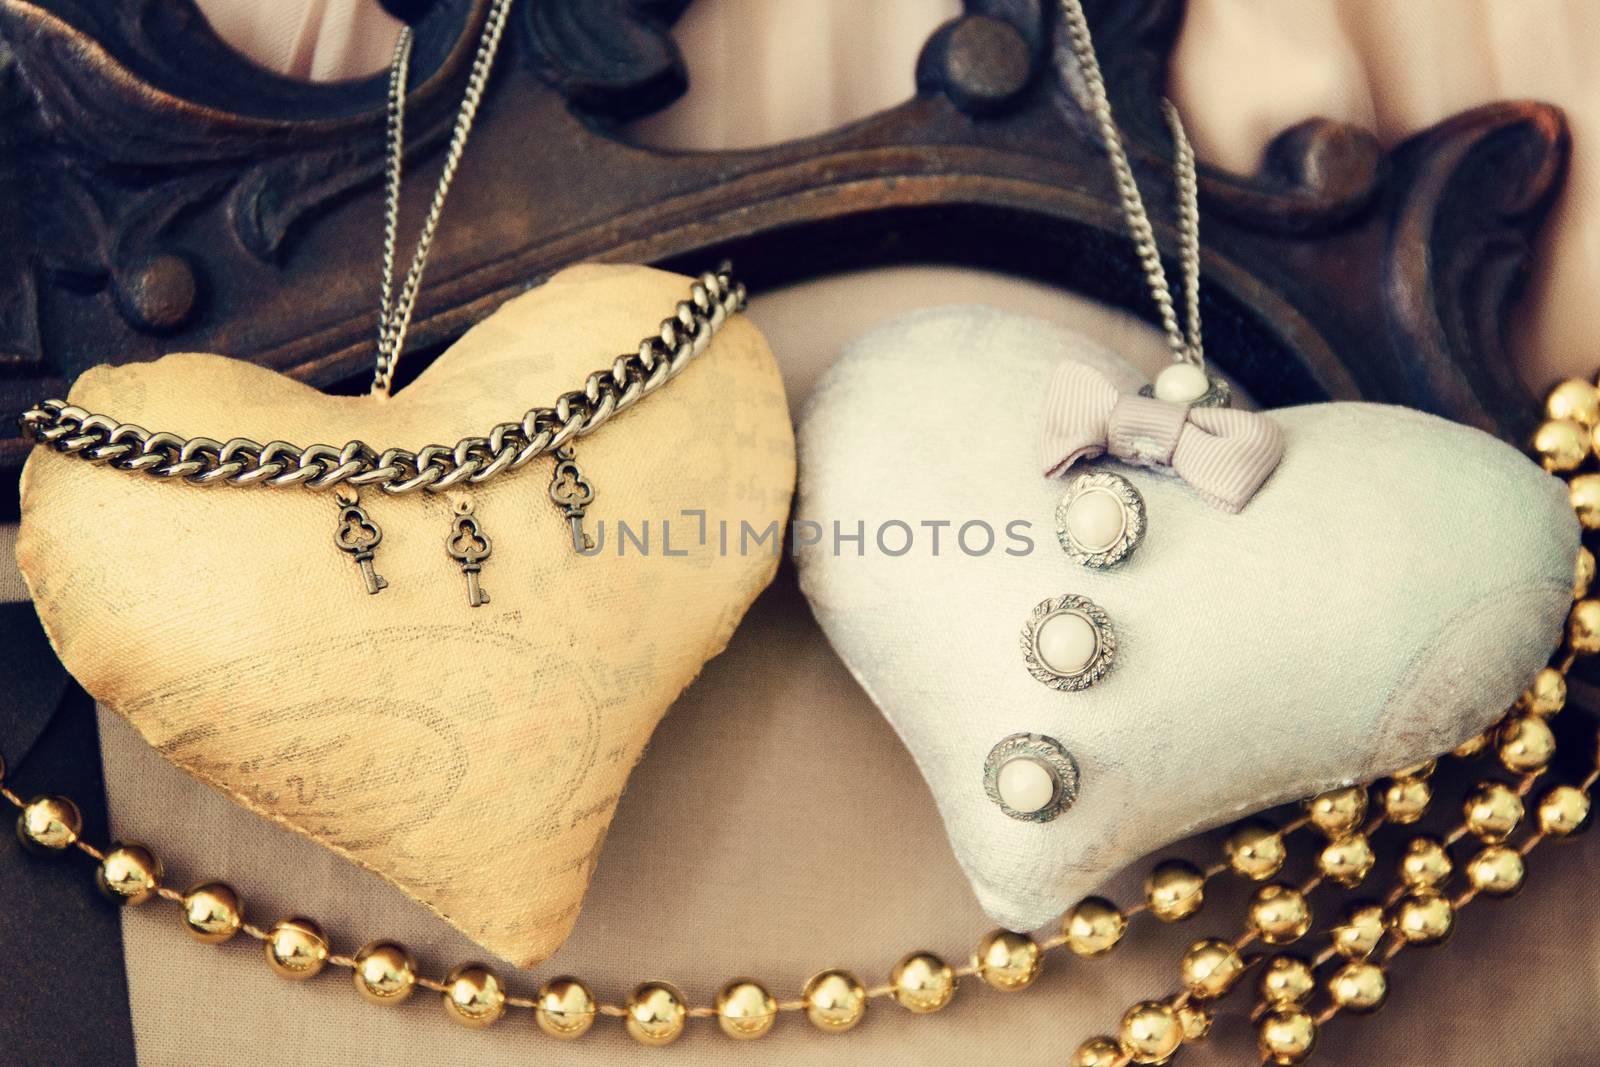 Vintage background with hearts for Valentine's day. Handmade. photo. by Irinavk